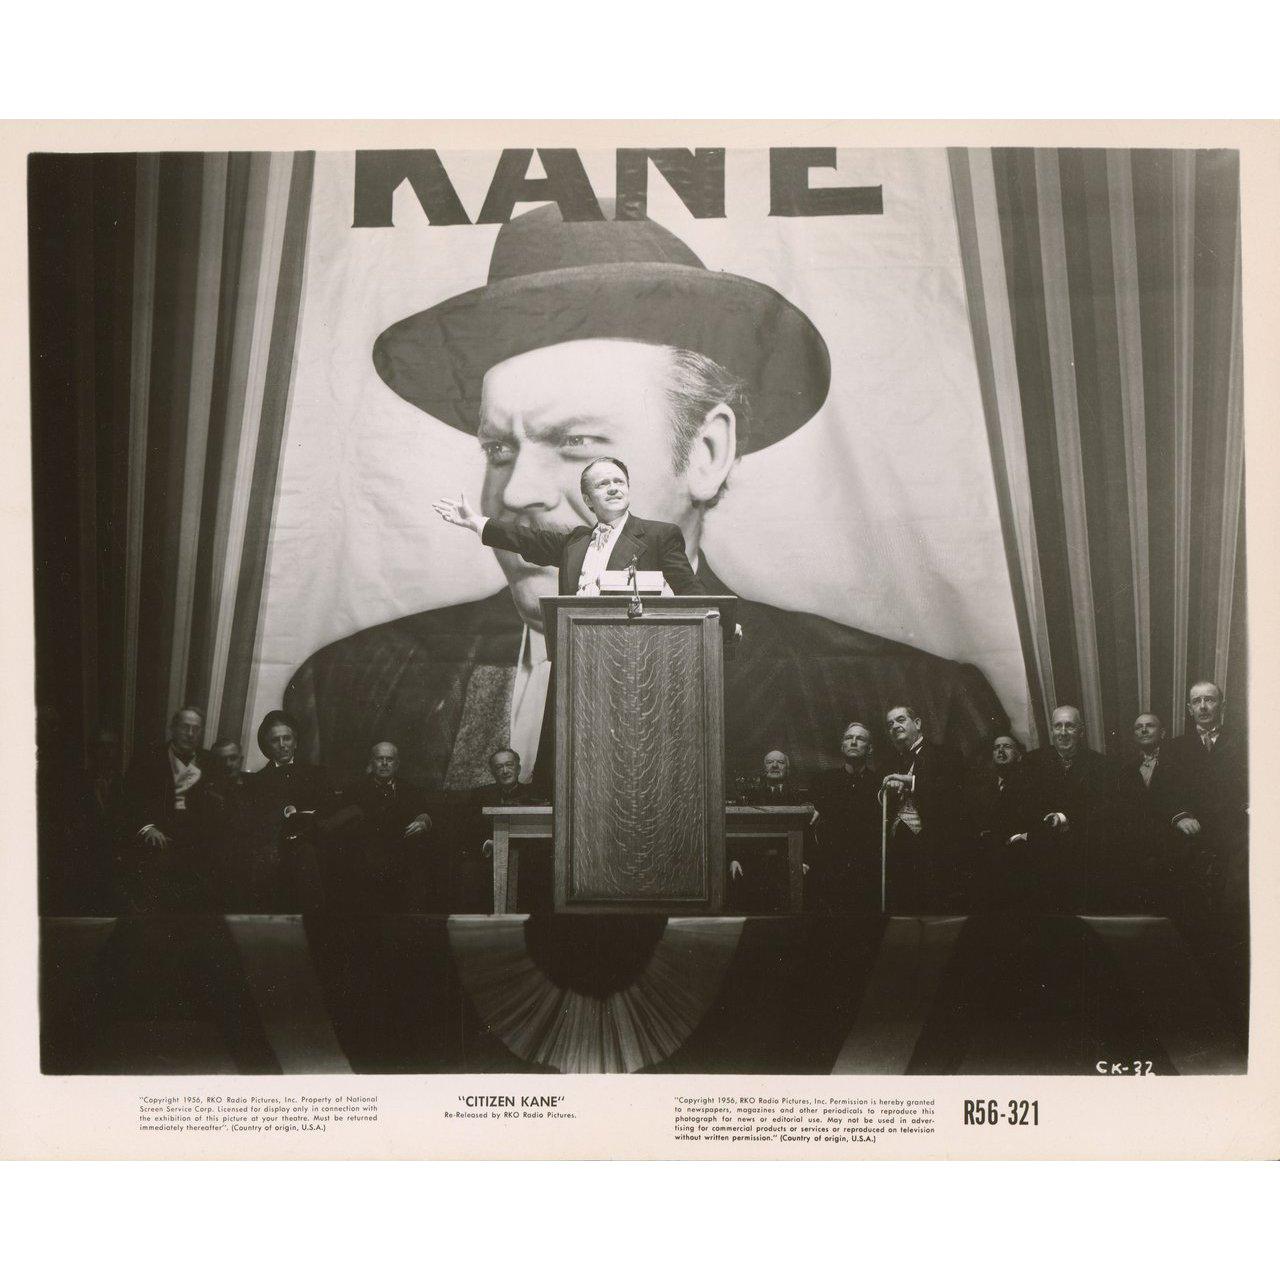 Original 1956 re-release U.S. silver gelatin single-weight photo for the 1941 film Citizen Kane directed by Orson Welles with Joseph Cotten / Dorothy Comingore / Agnes Moorehead / Ruth Warrick. Very Good-Fine condition. Please note: the size is